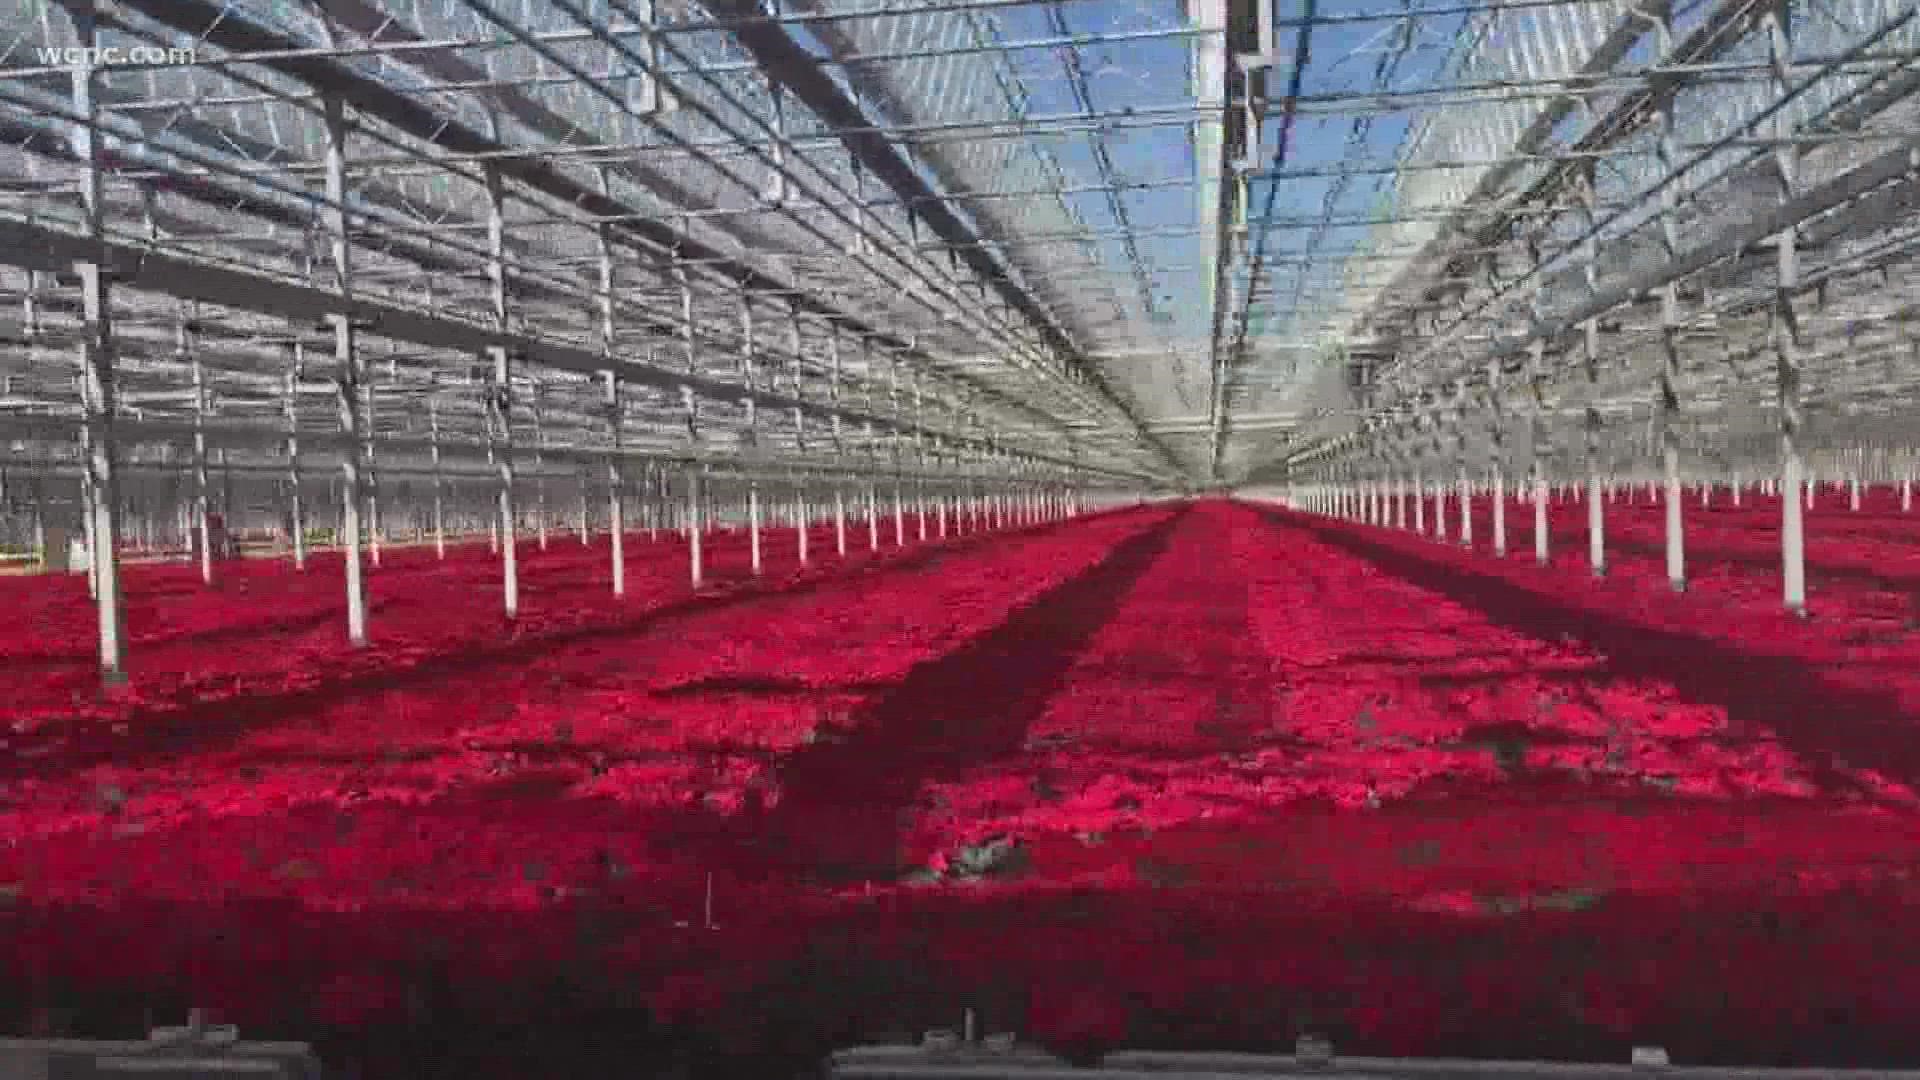 The largest single-site greenhouse in the country is right in Charlotte's backyard. Huntersville is home to the site, which covers 200 acres.